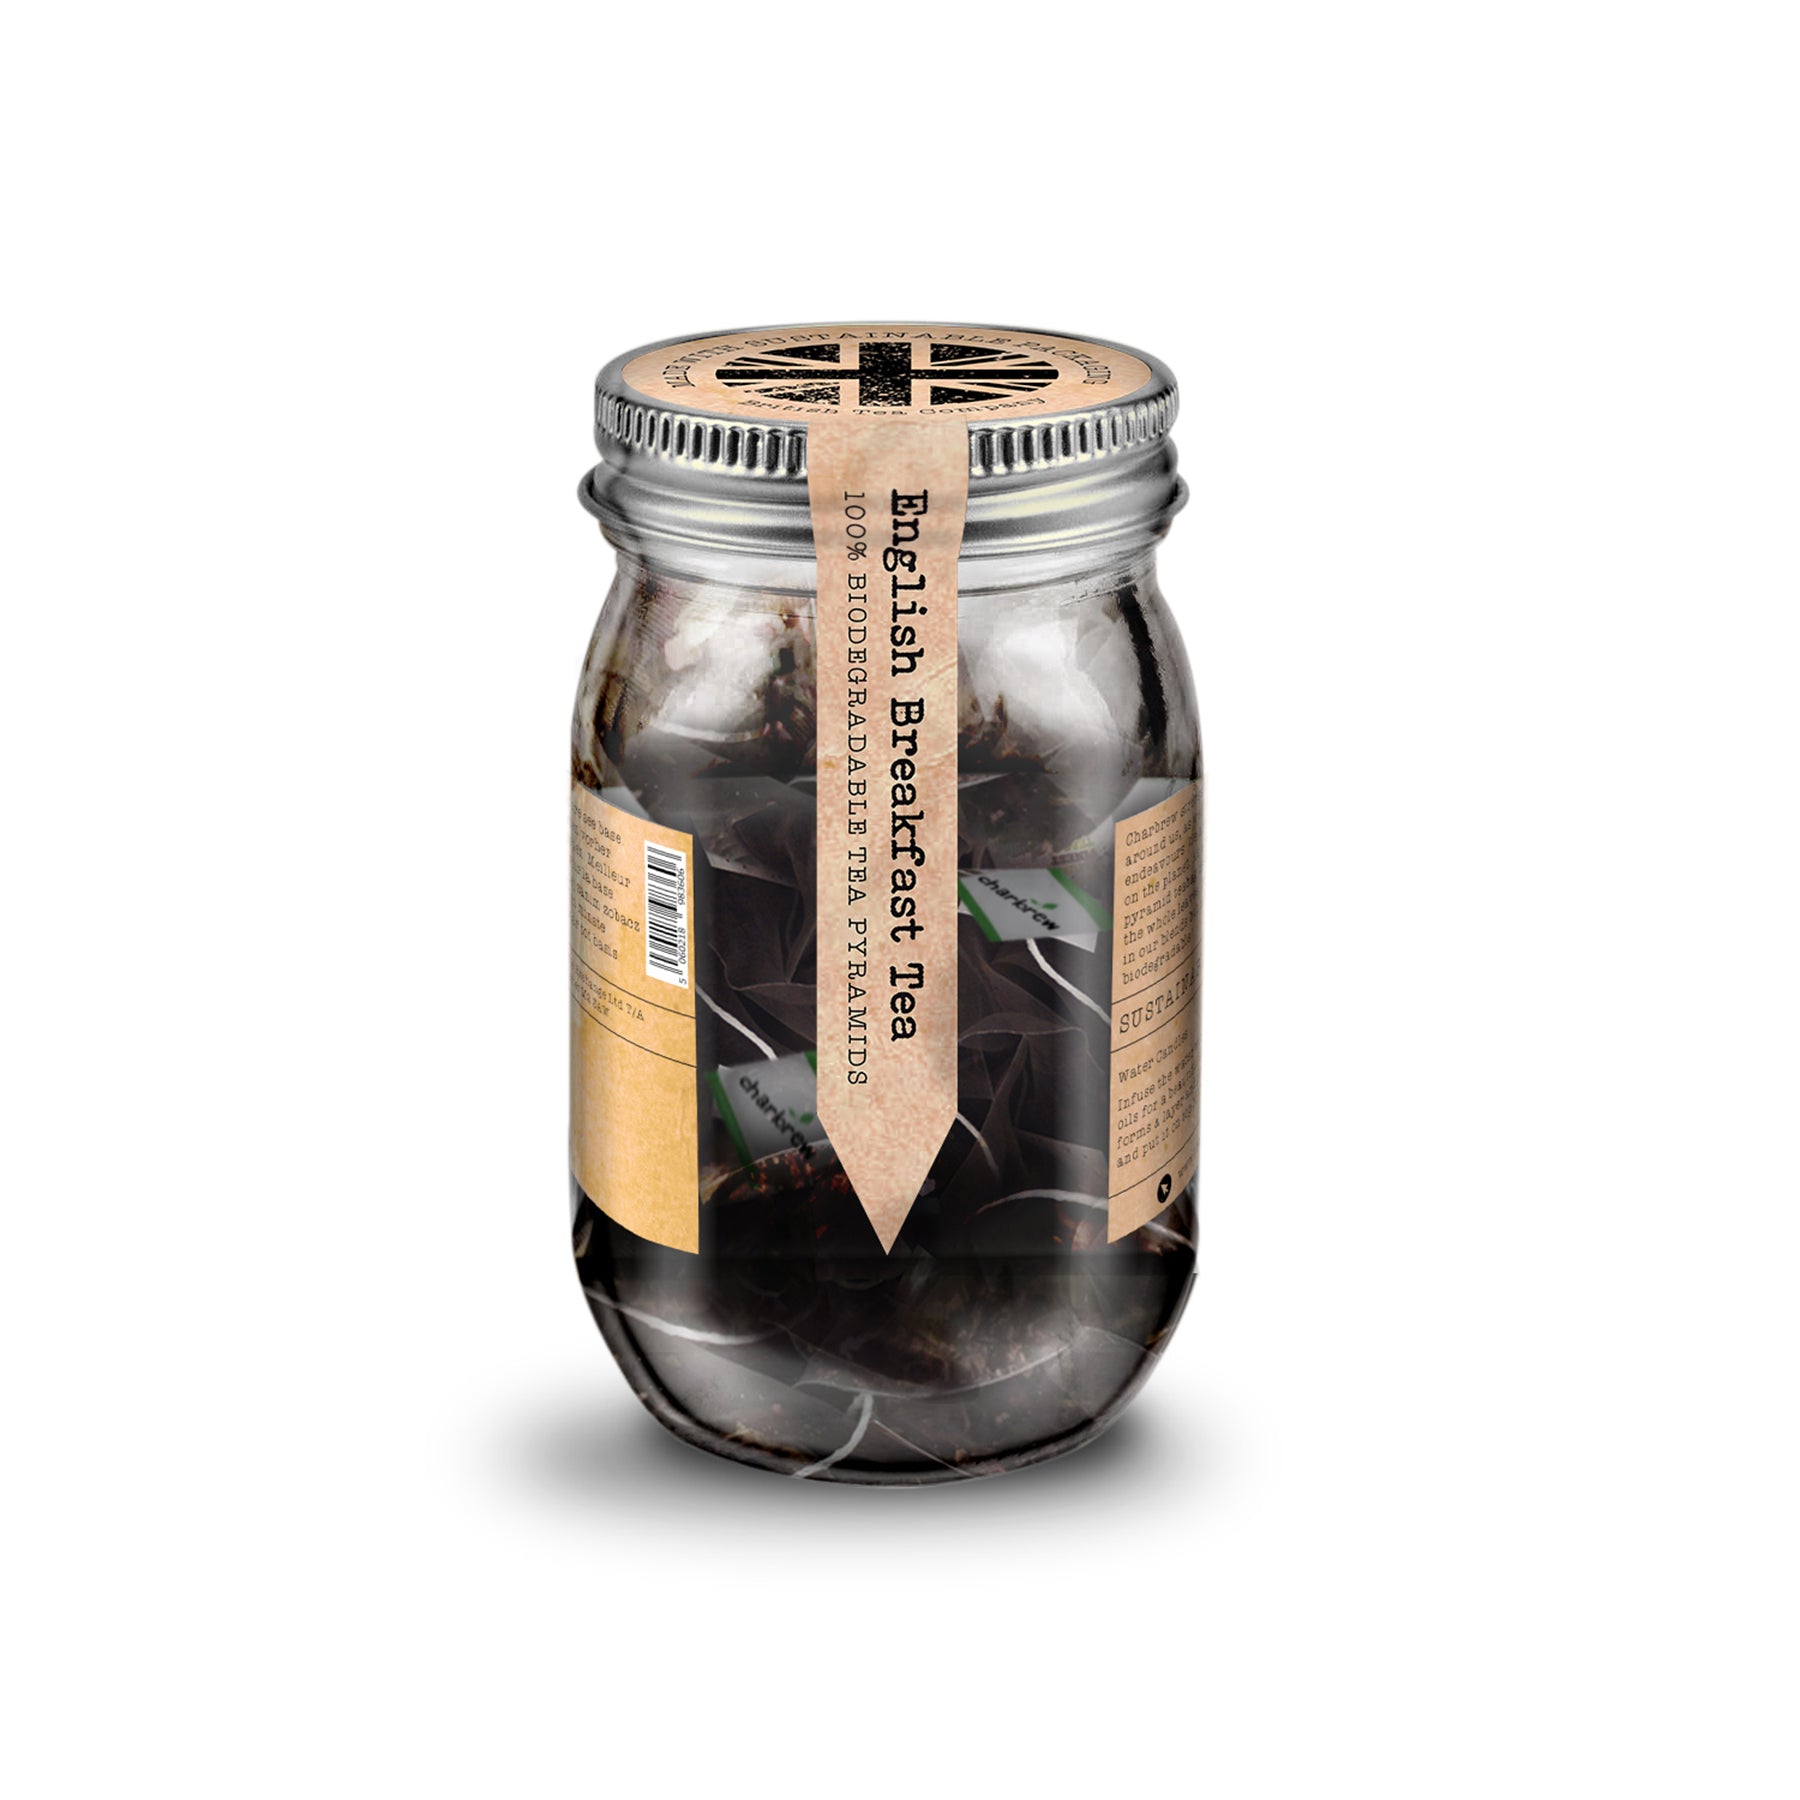 Charbrew carefully crafted English breakfast tea in re-usable mason jar